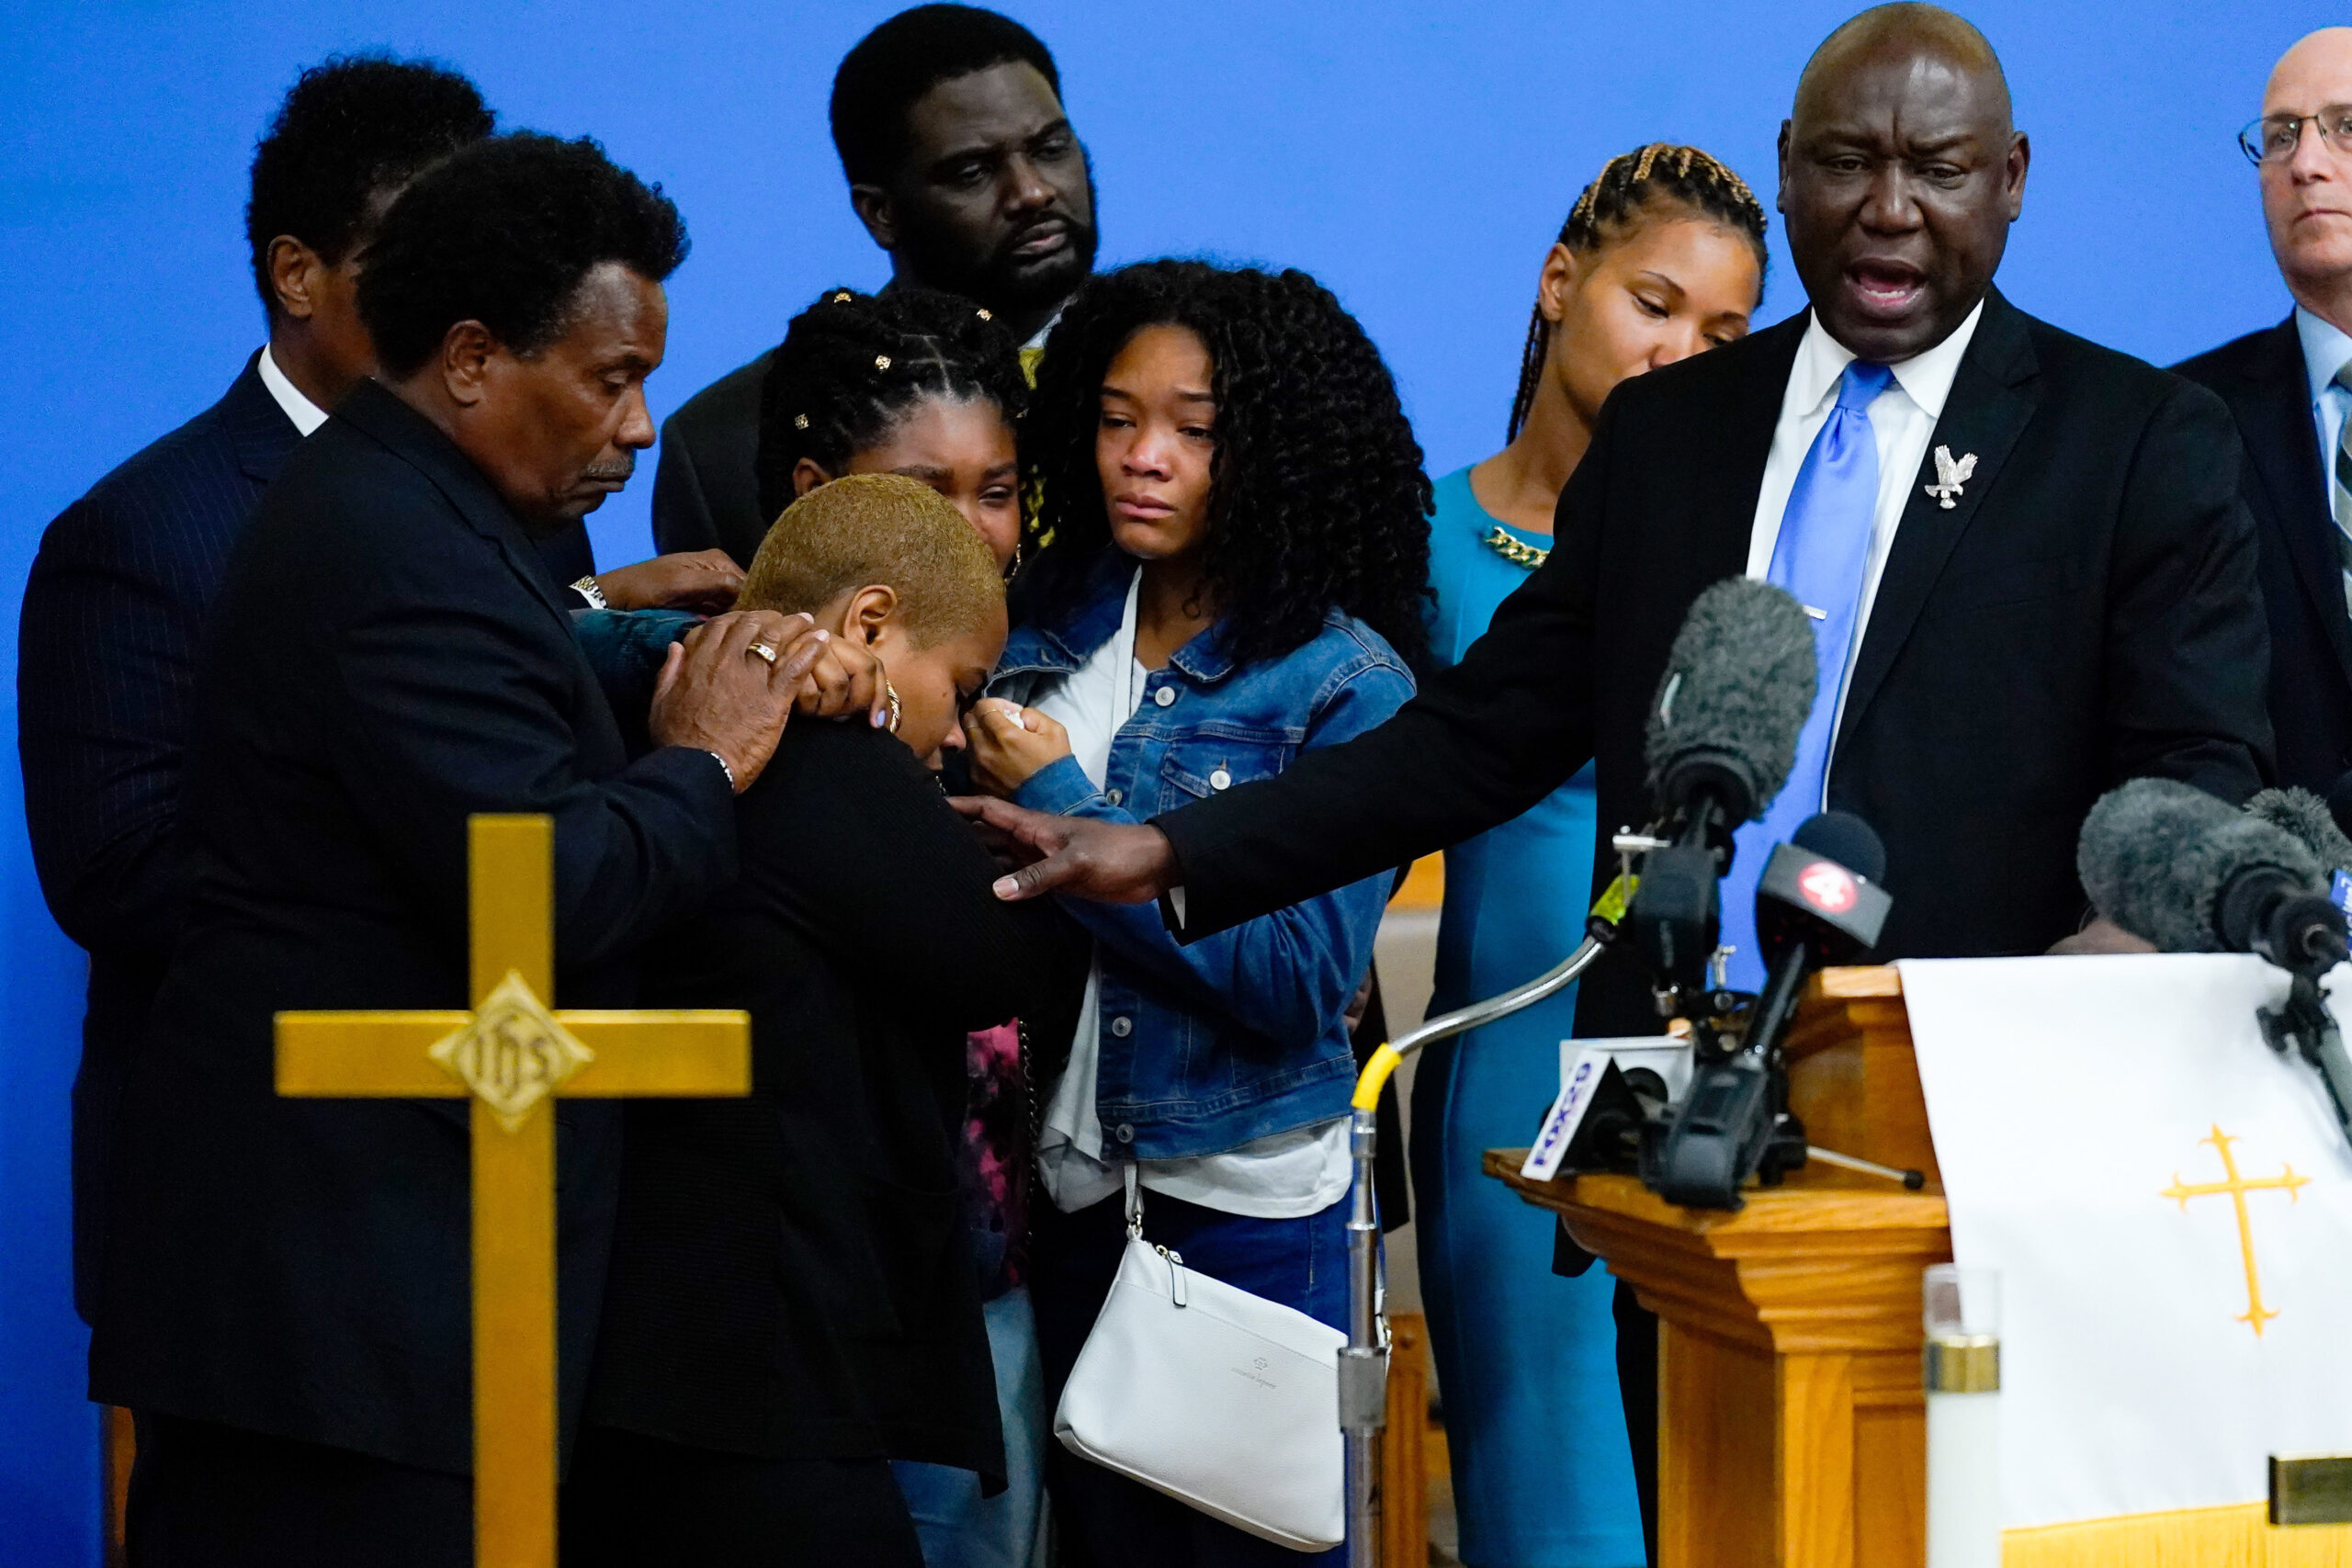 Attorney Benjamin Crump, right, accompanied by the family of Ruth Whitfield, a victim of shooting at a supermarket, speaks with members of the media during a news conference in Buffalo, N.Y., Monday, May 16, 2022. (AP Photo/Matt Rourke)